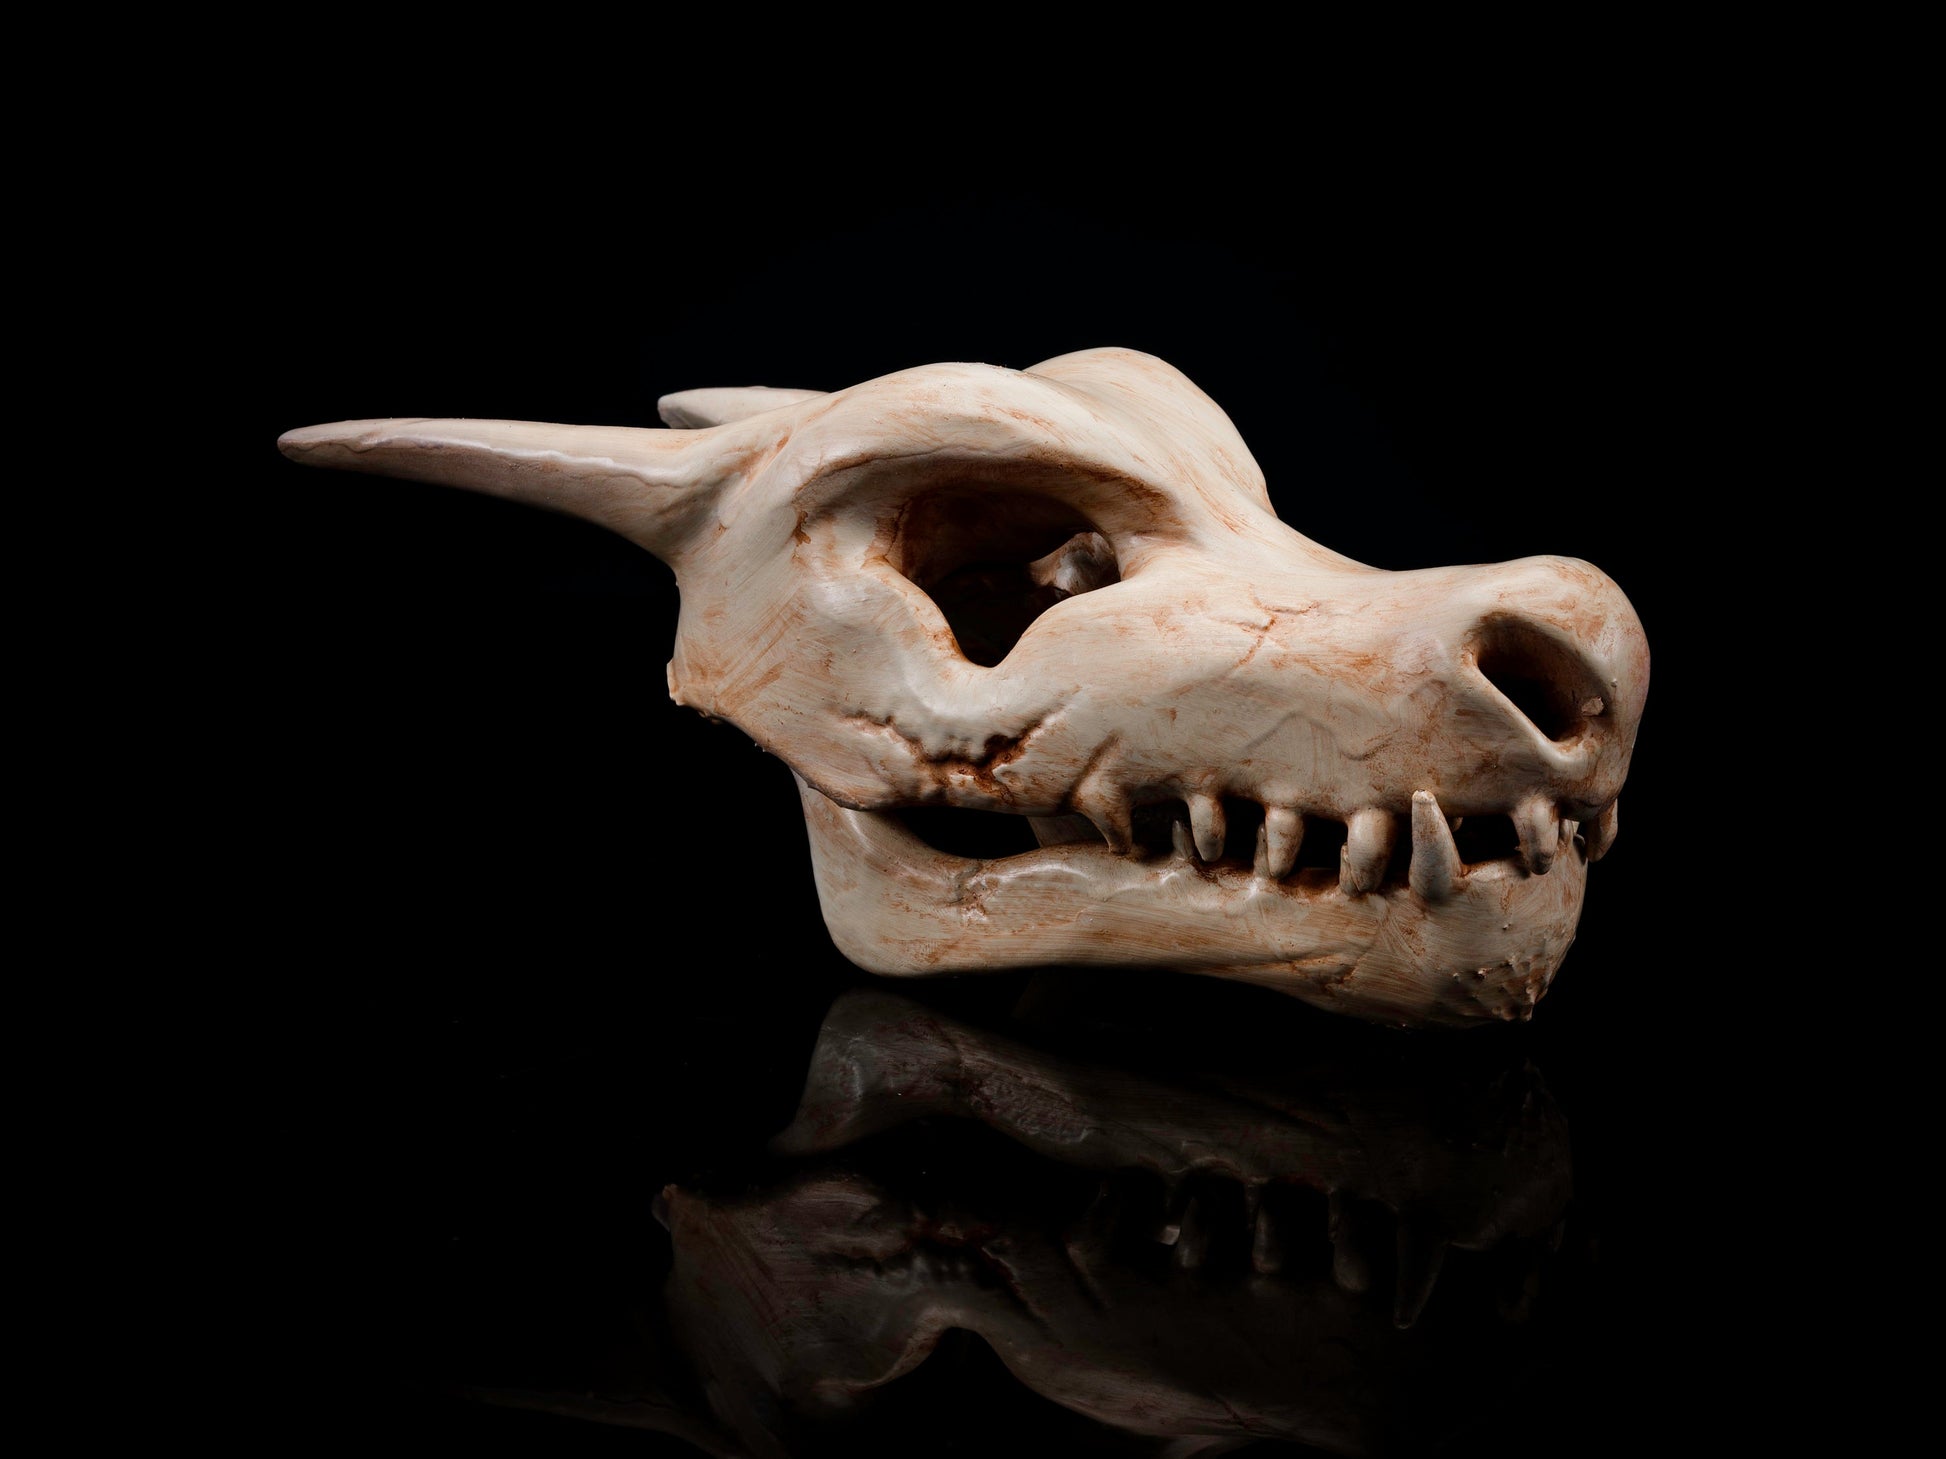 Inspired by Charizard Skull Replica - Safety Third Studios